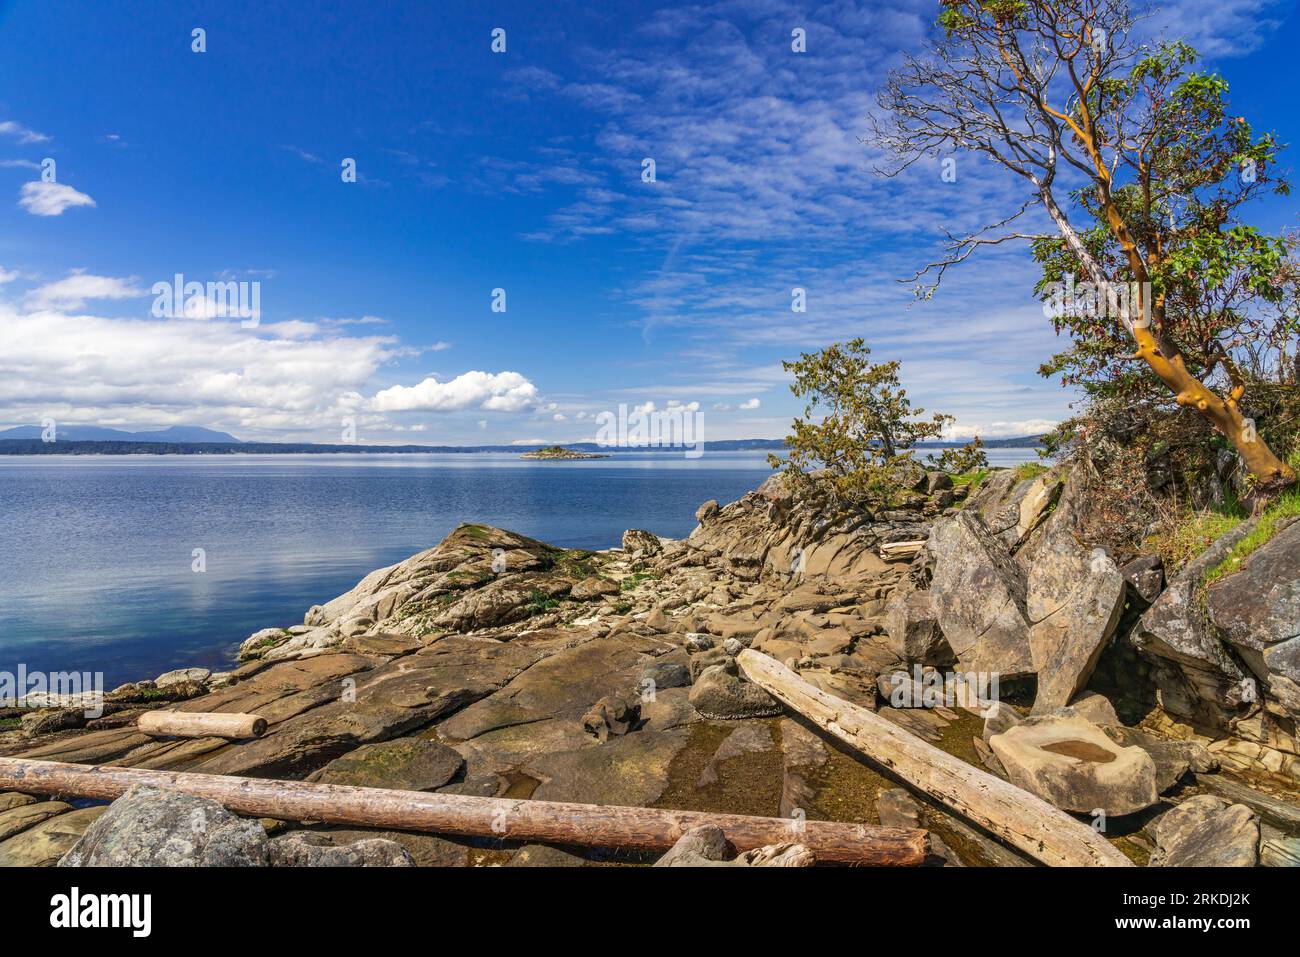 A scenic view from Pilkey Point on Thetis Island, Vancouver Island, British Columbia, Canada. Stock Photo